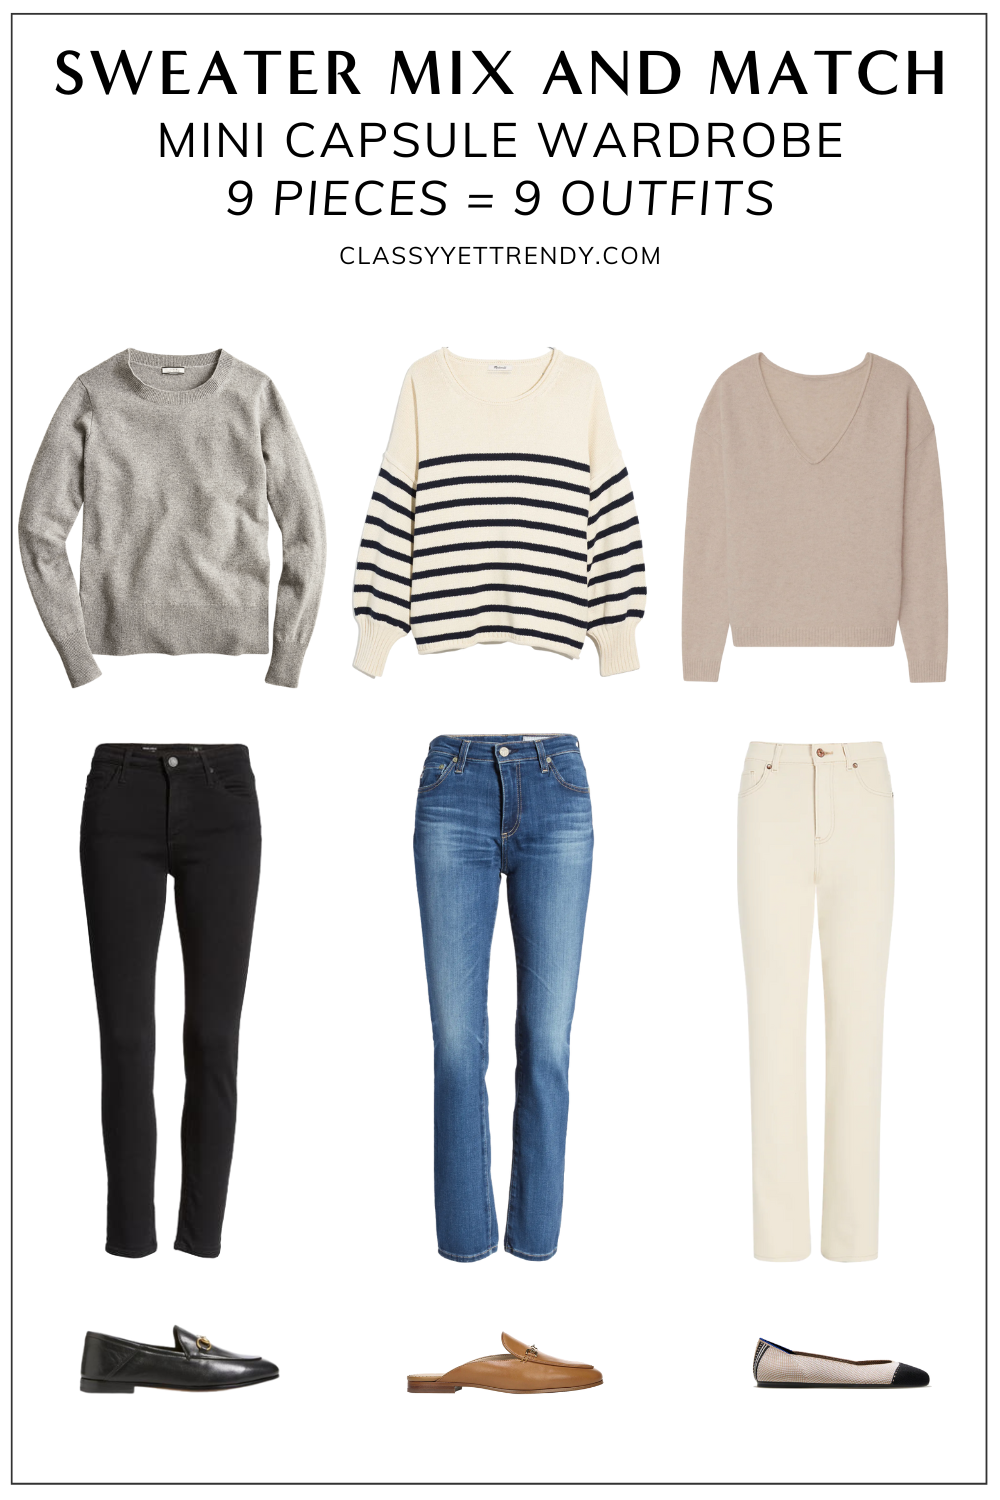 Sweaters Mix and Match Outfits: 9 Pieces = 27 Outfits - Classy Yet